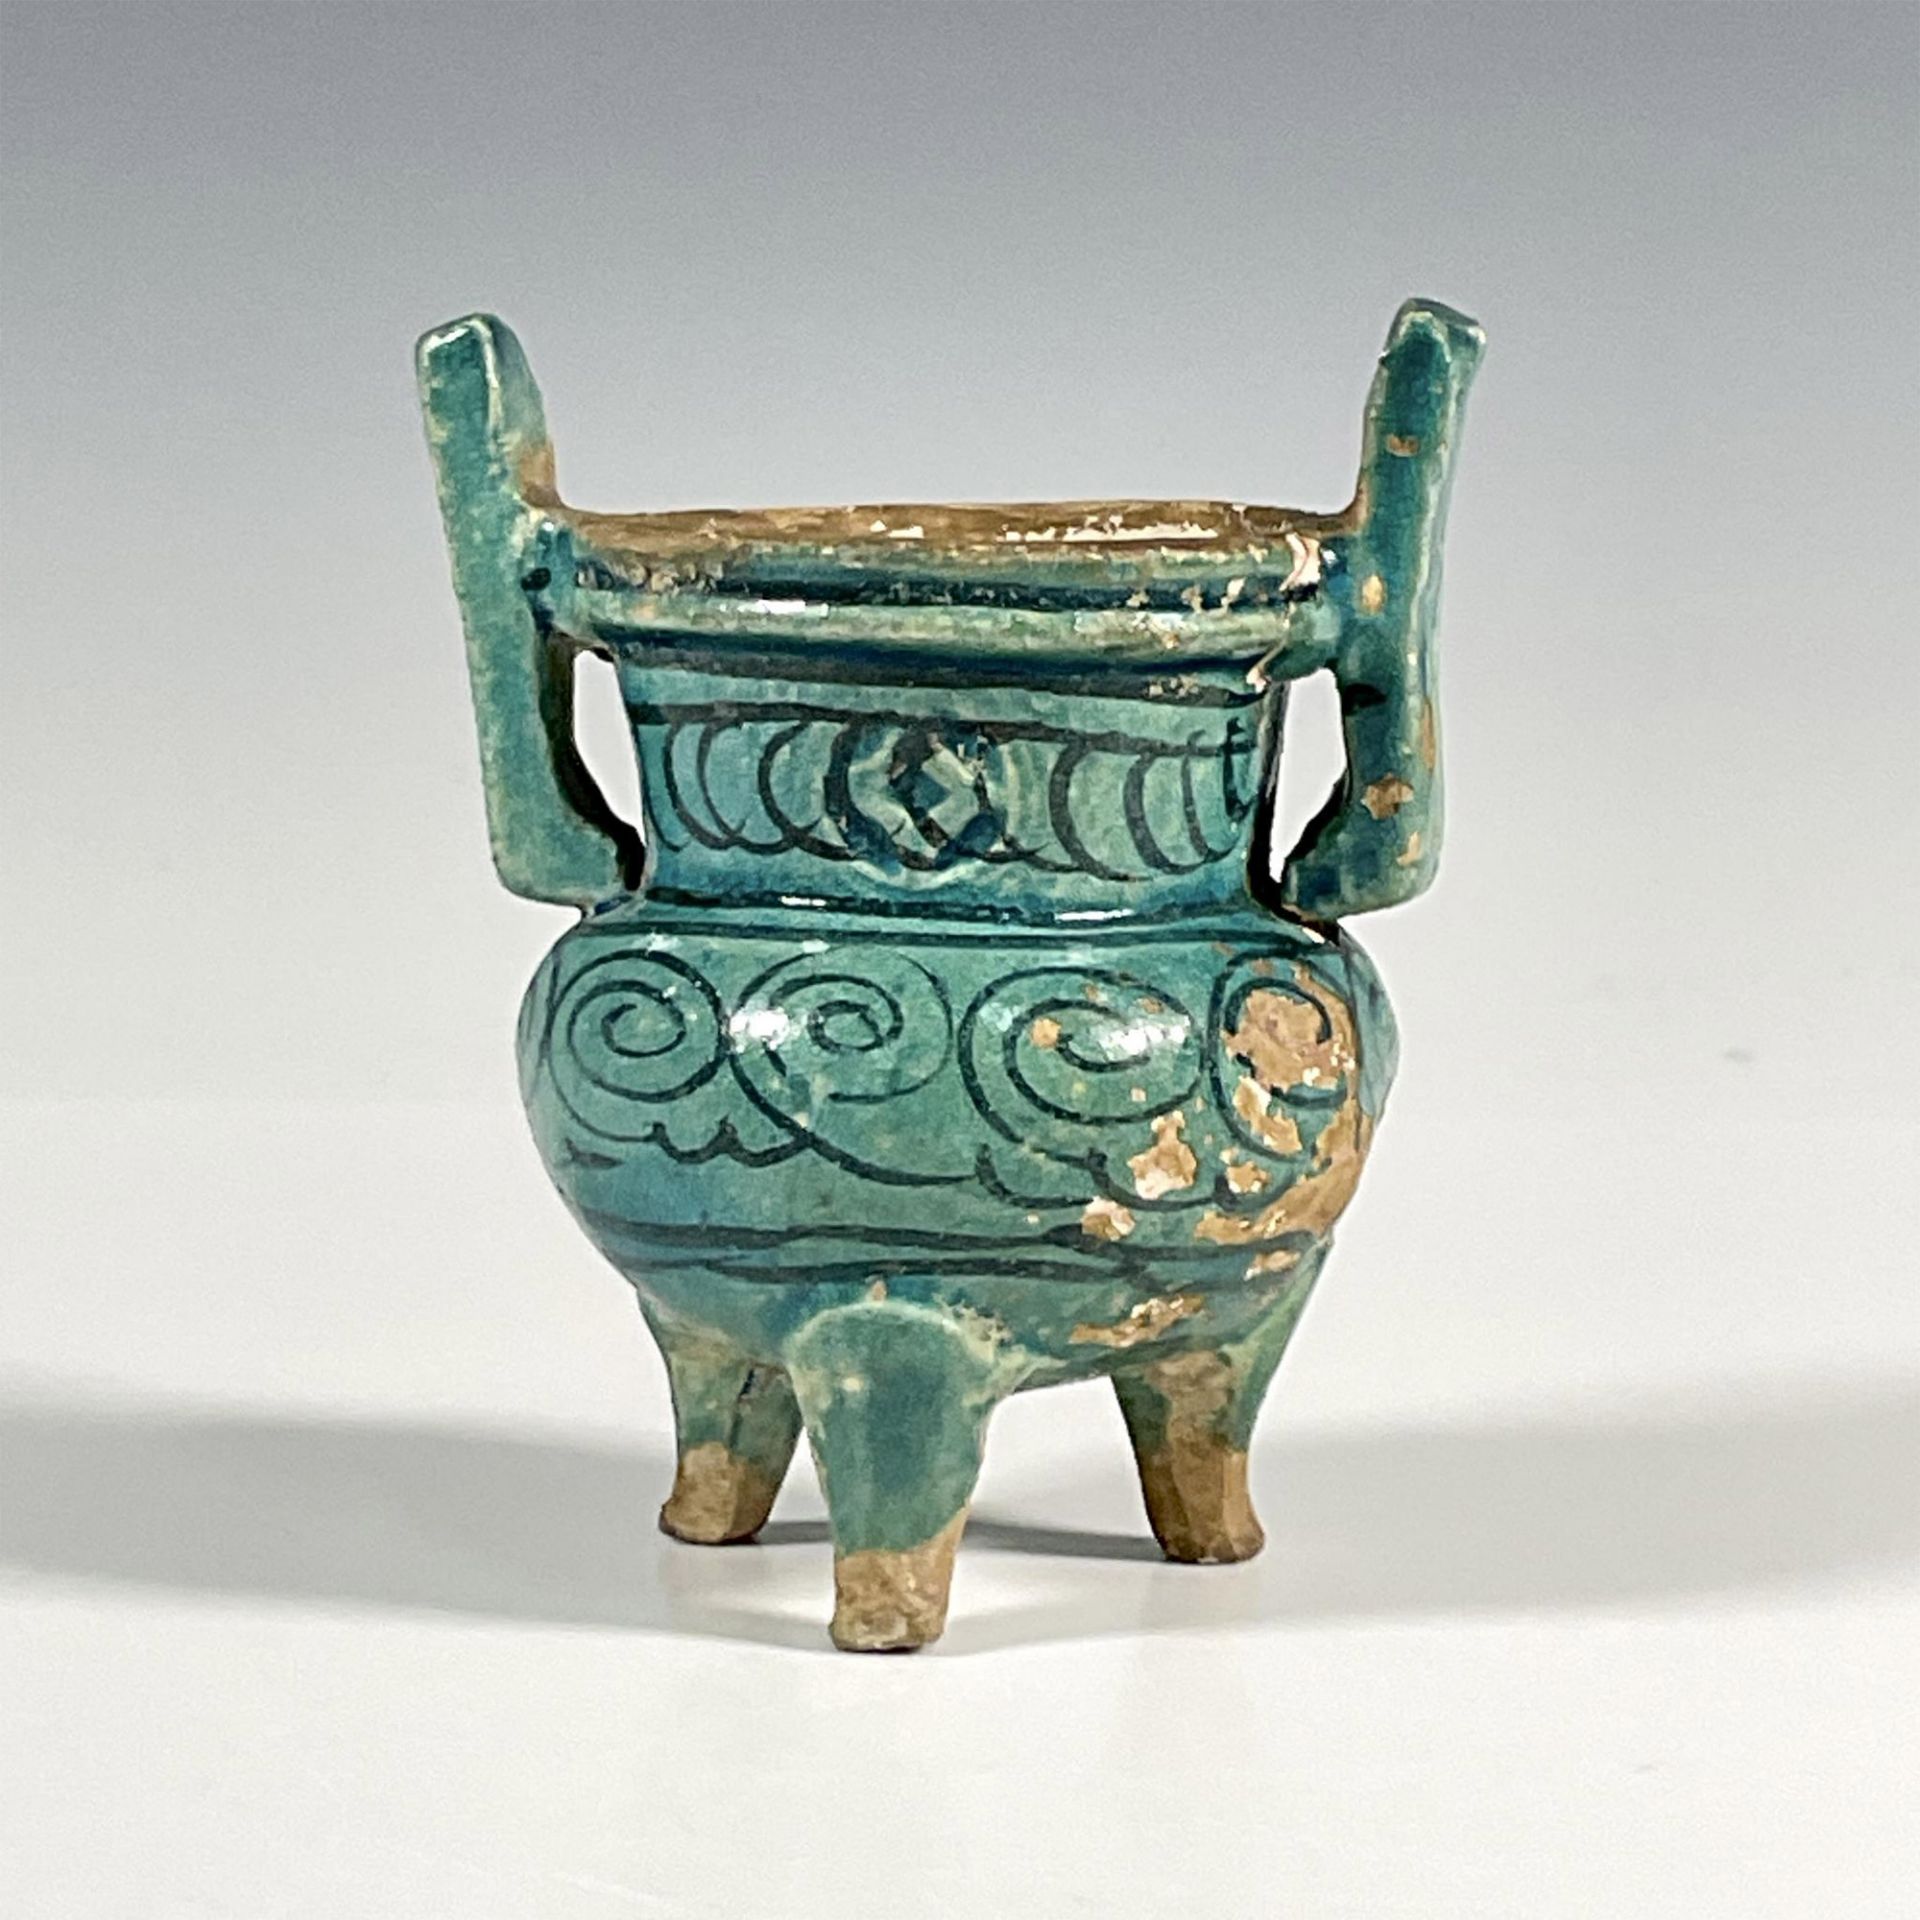 Antique Chinese Ming Dynasty Turquoise Pottery Censer - Image 2 of 3